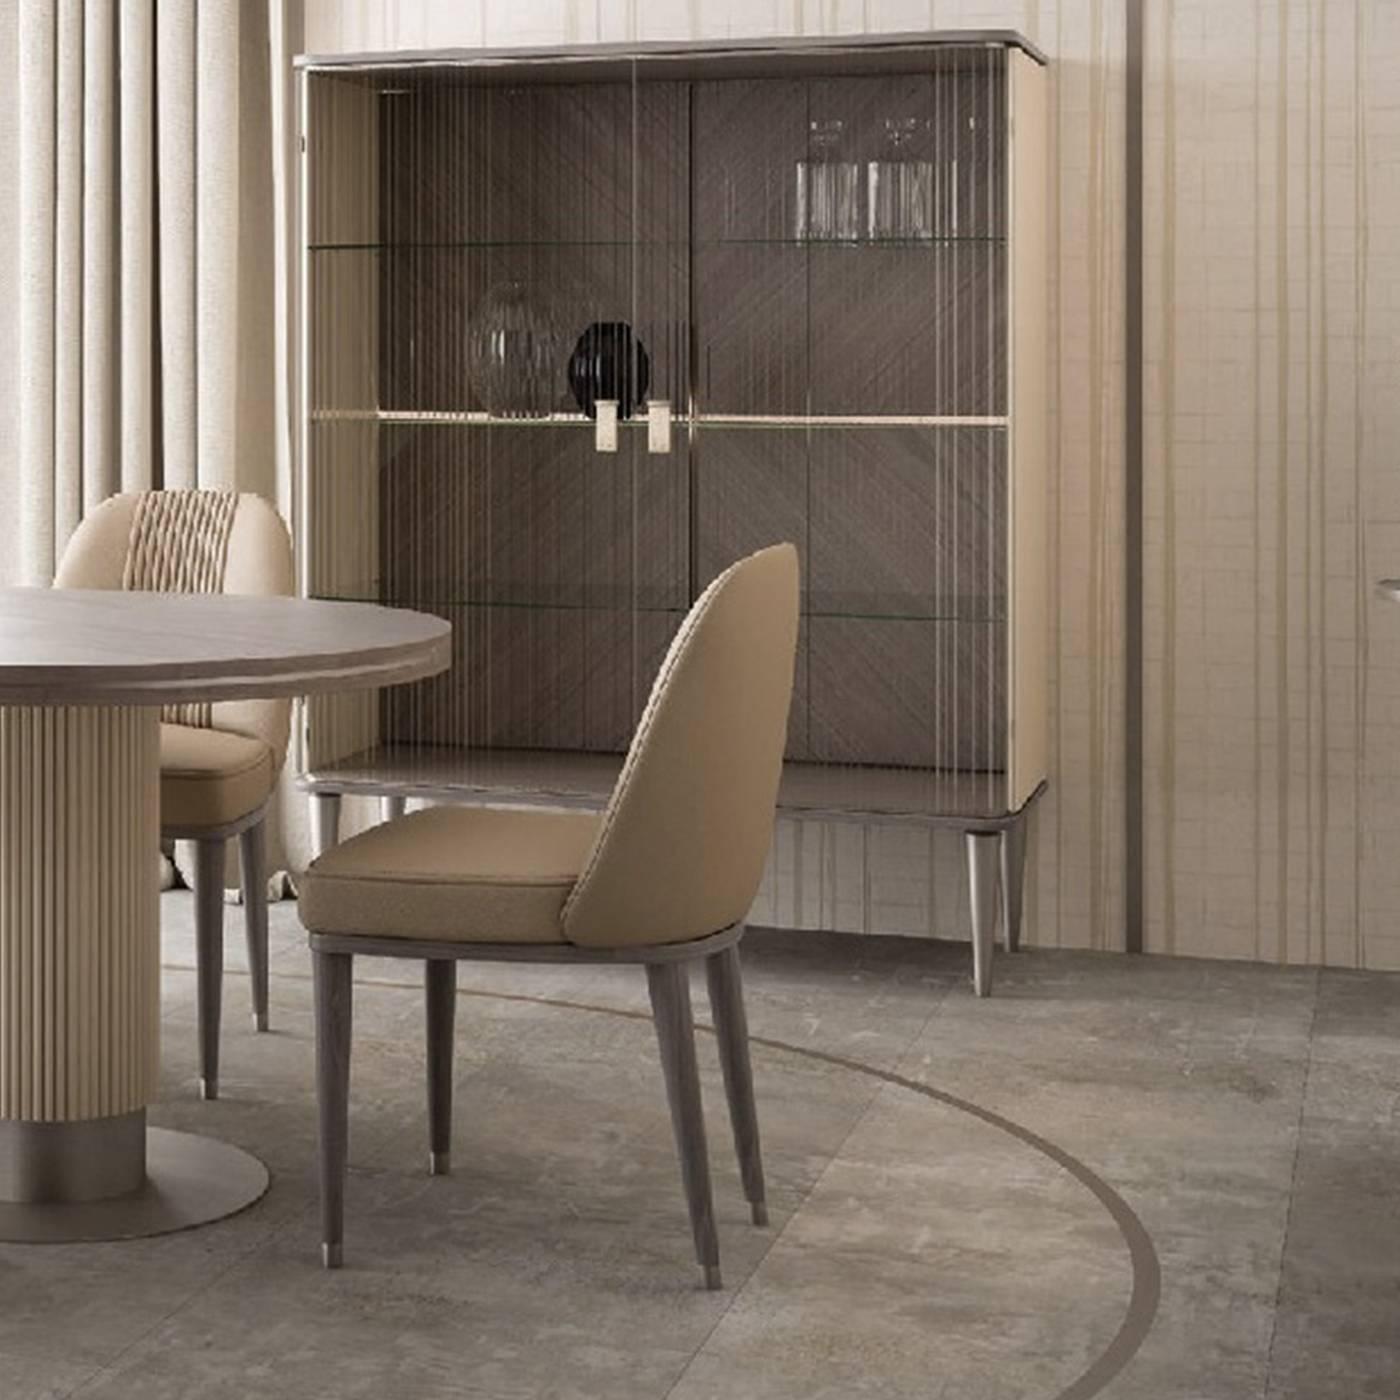 A remarkable union of expert craftsmanship and innovative aesthetic, this unique cabinet exudes elegance and sophistication. Standing on four conical wood feet with a gray finish, the lacquered beige wood cabinet features a sophisticated pattern